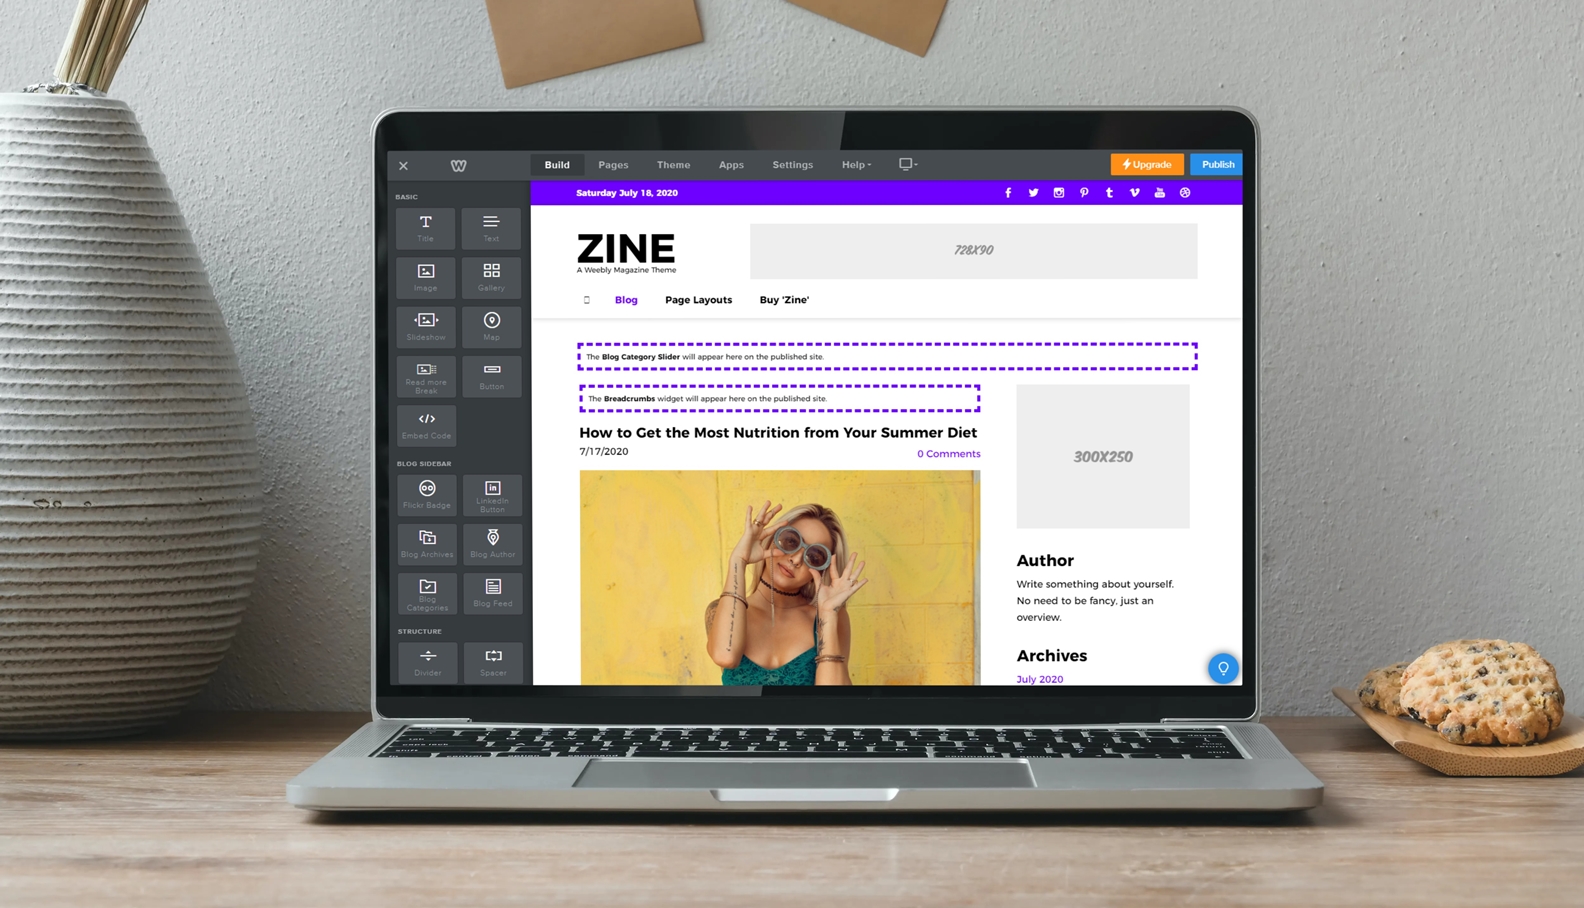 Zine Weebly Magazine Theme in Weebly Editor